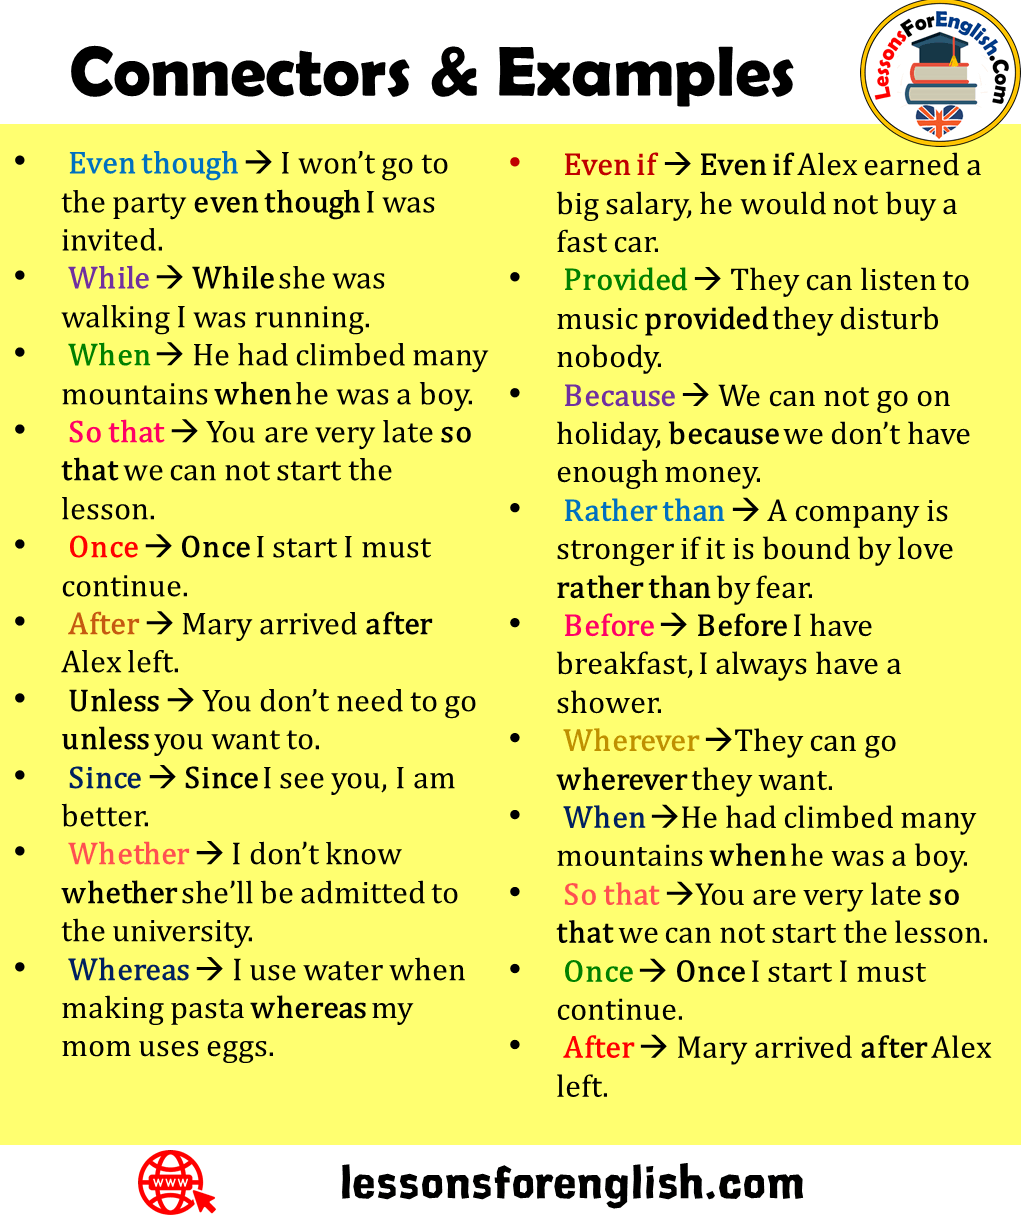 english-connectors-examples-lessons-for-english